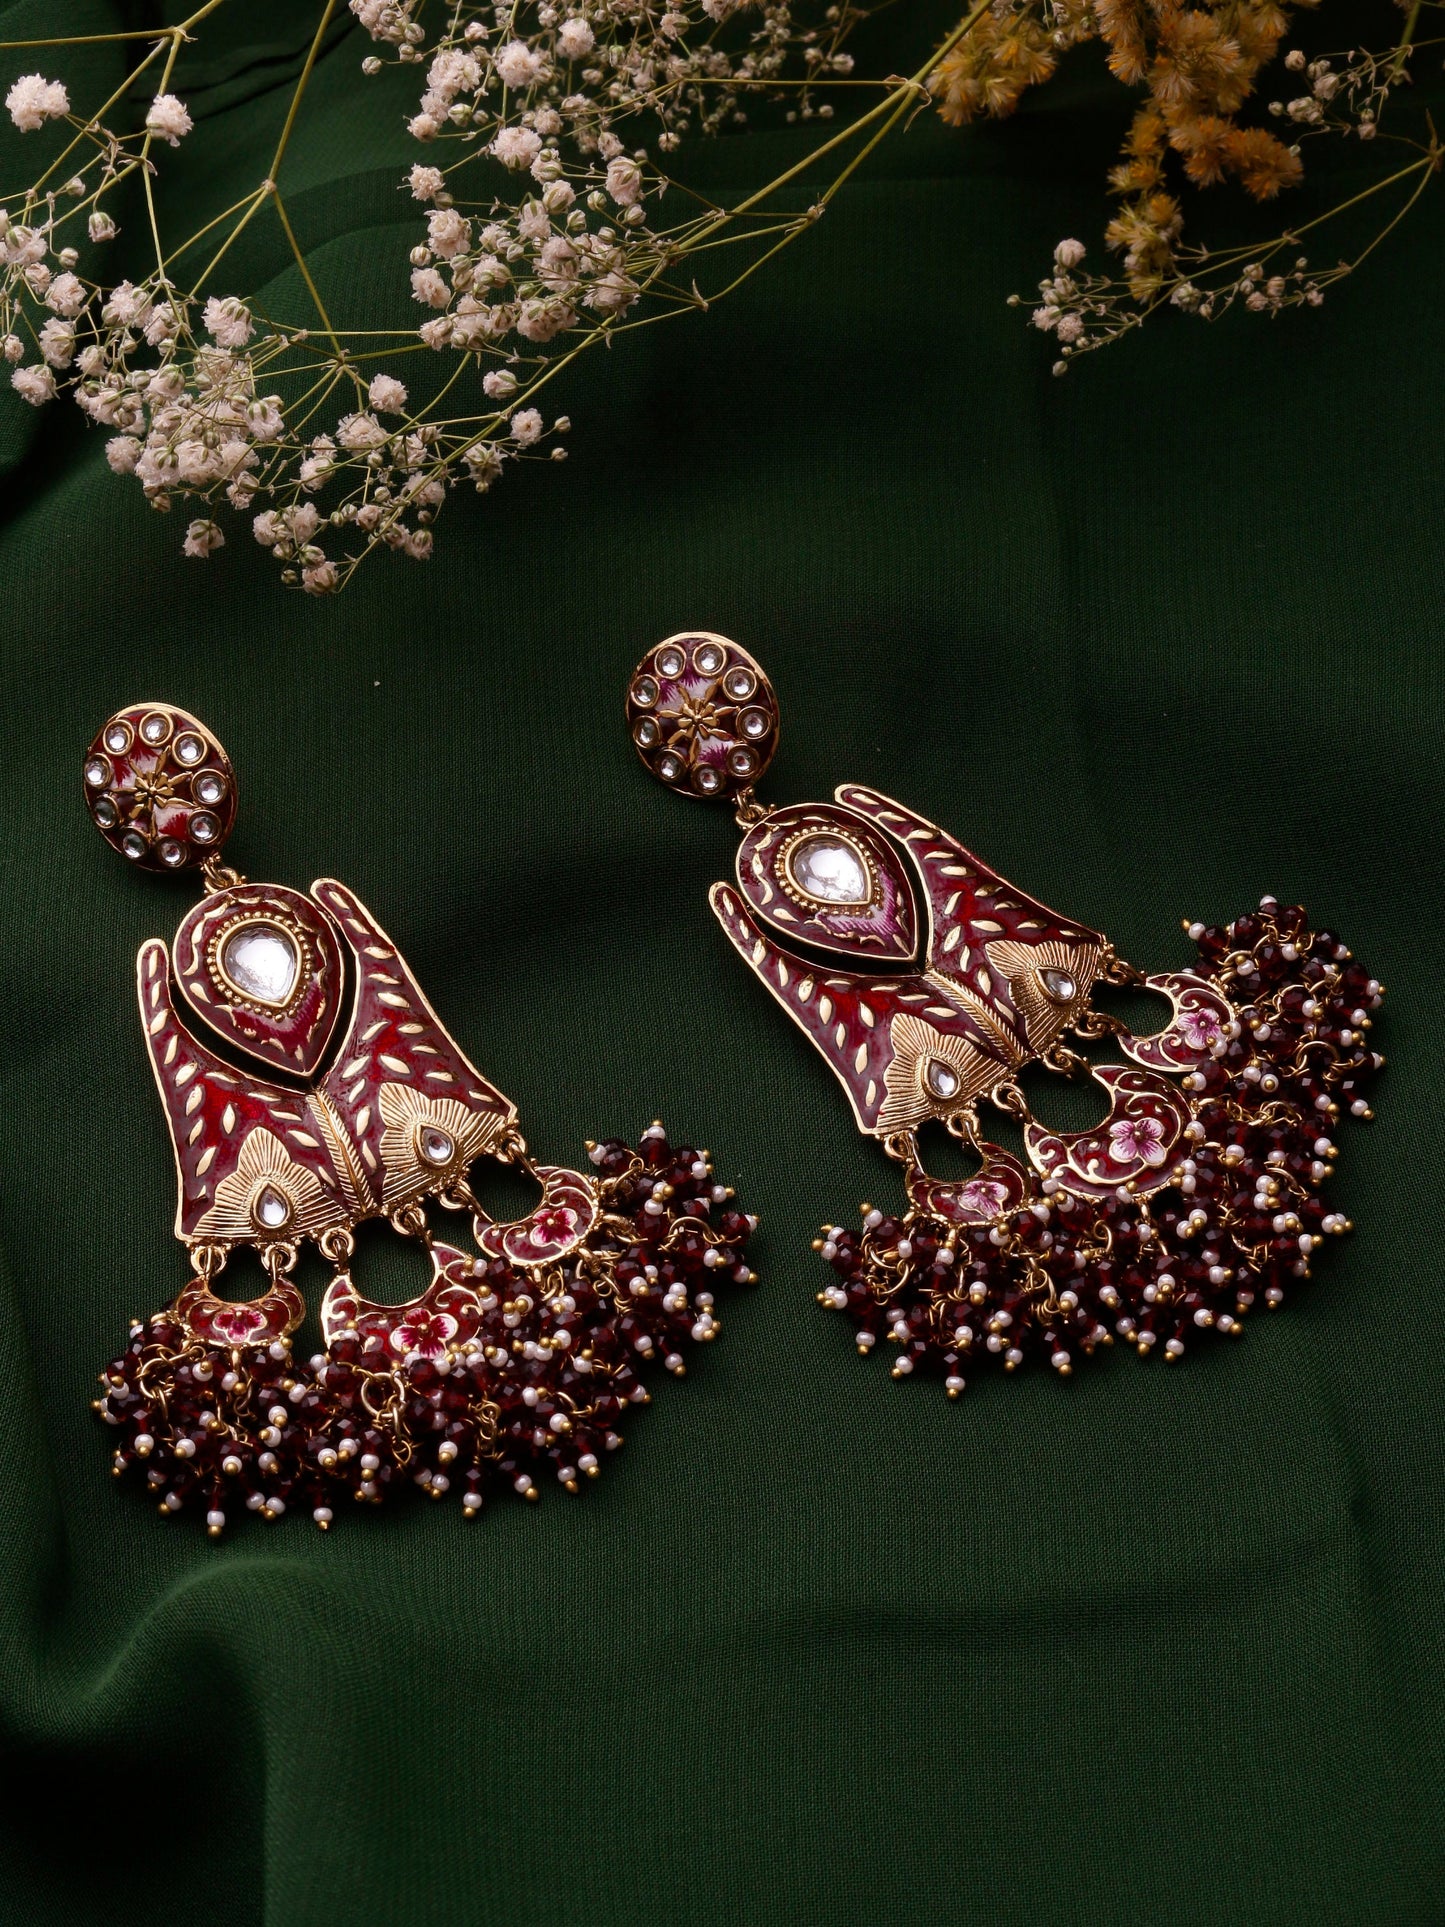 Swisni Alloy Golden Earrings with Maroon Beads For Women|For Girls|Gifting|Anniversary|Birthday|Girlfriend